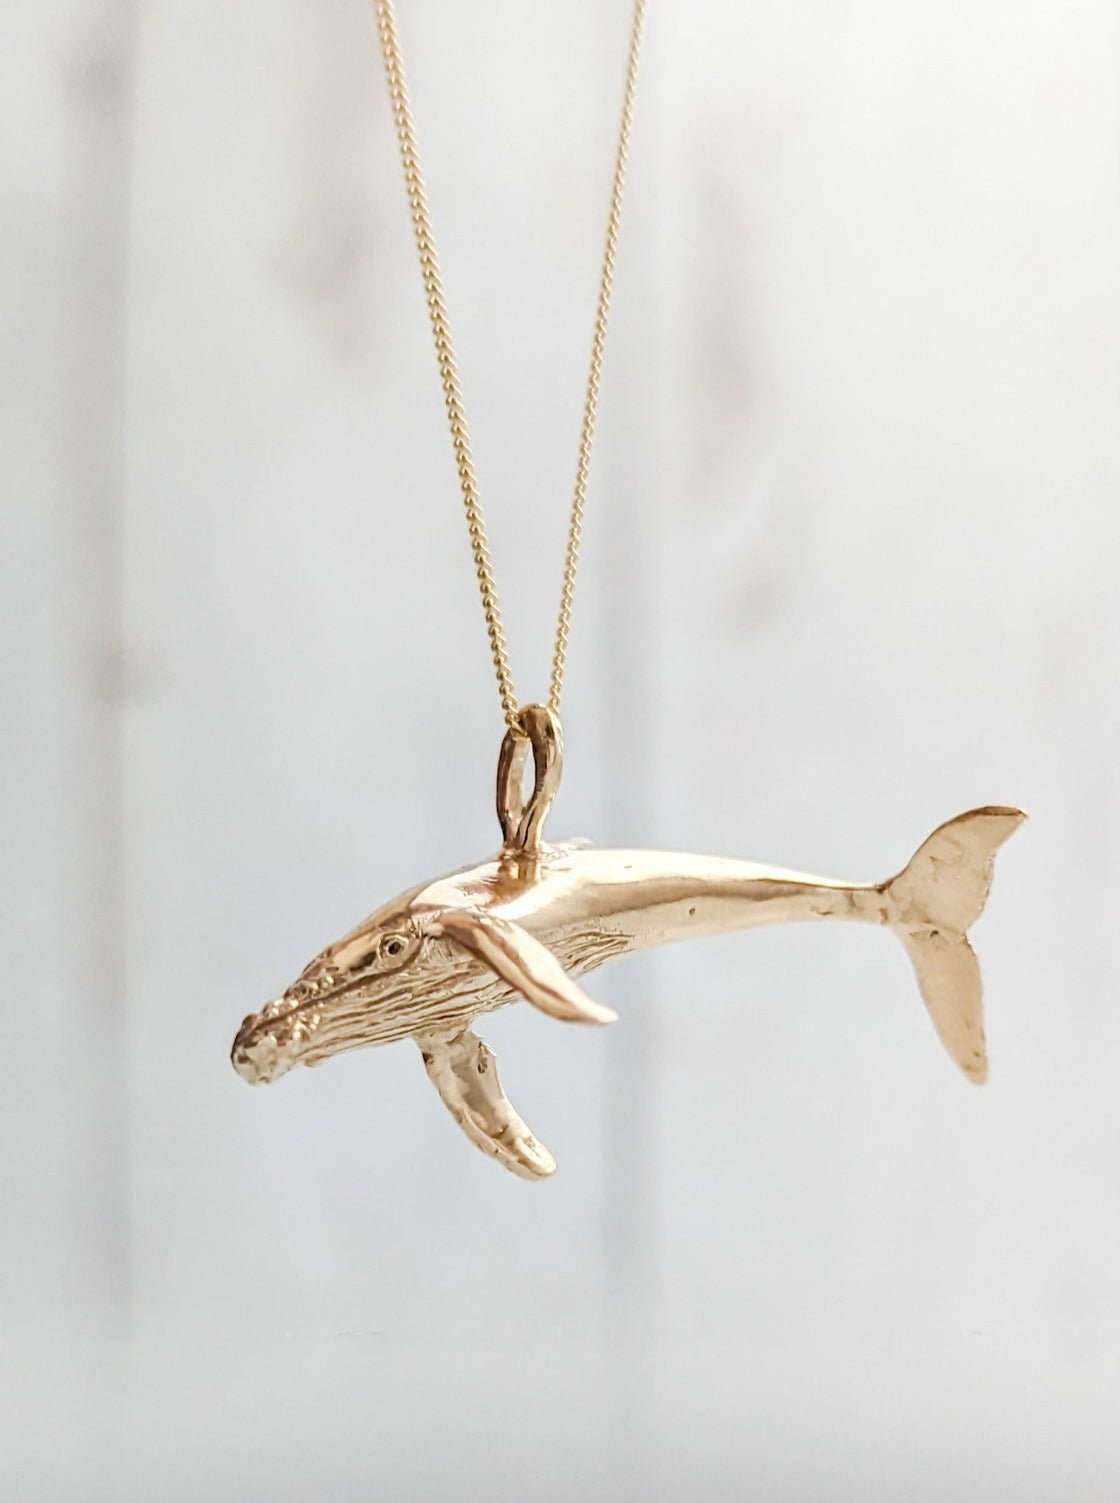 Stunning 9 carat gold humpback whale necklace